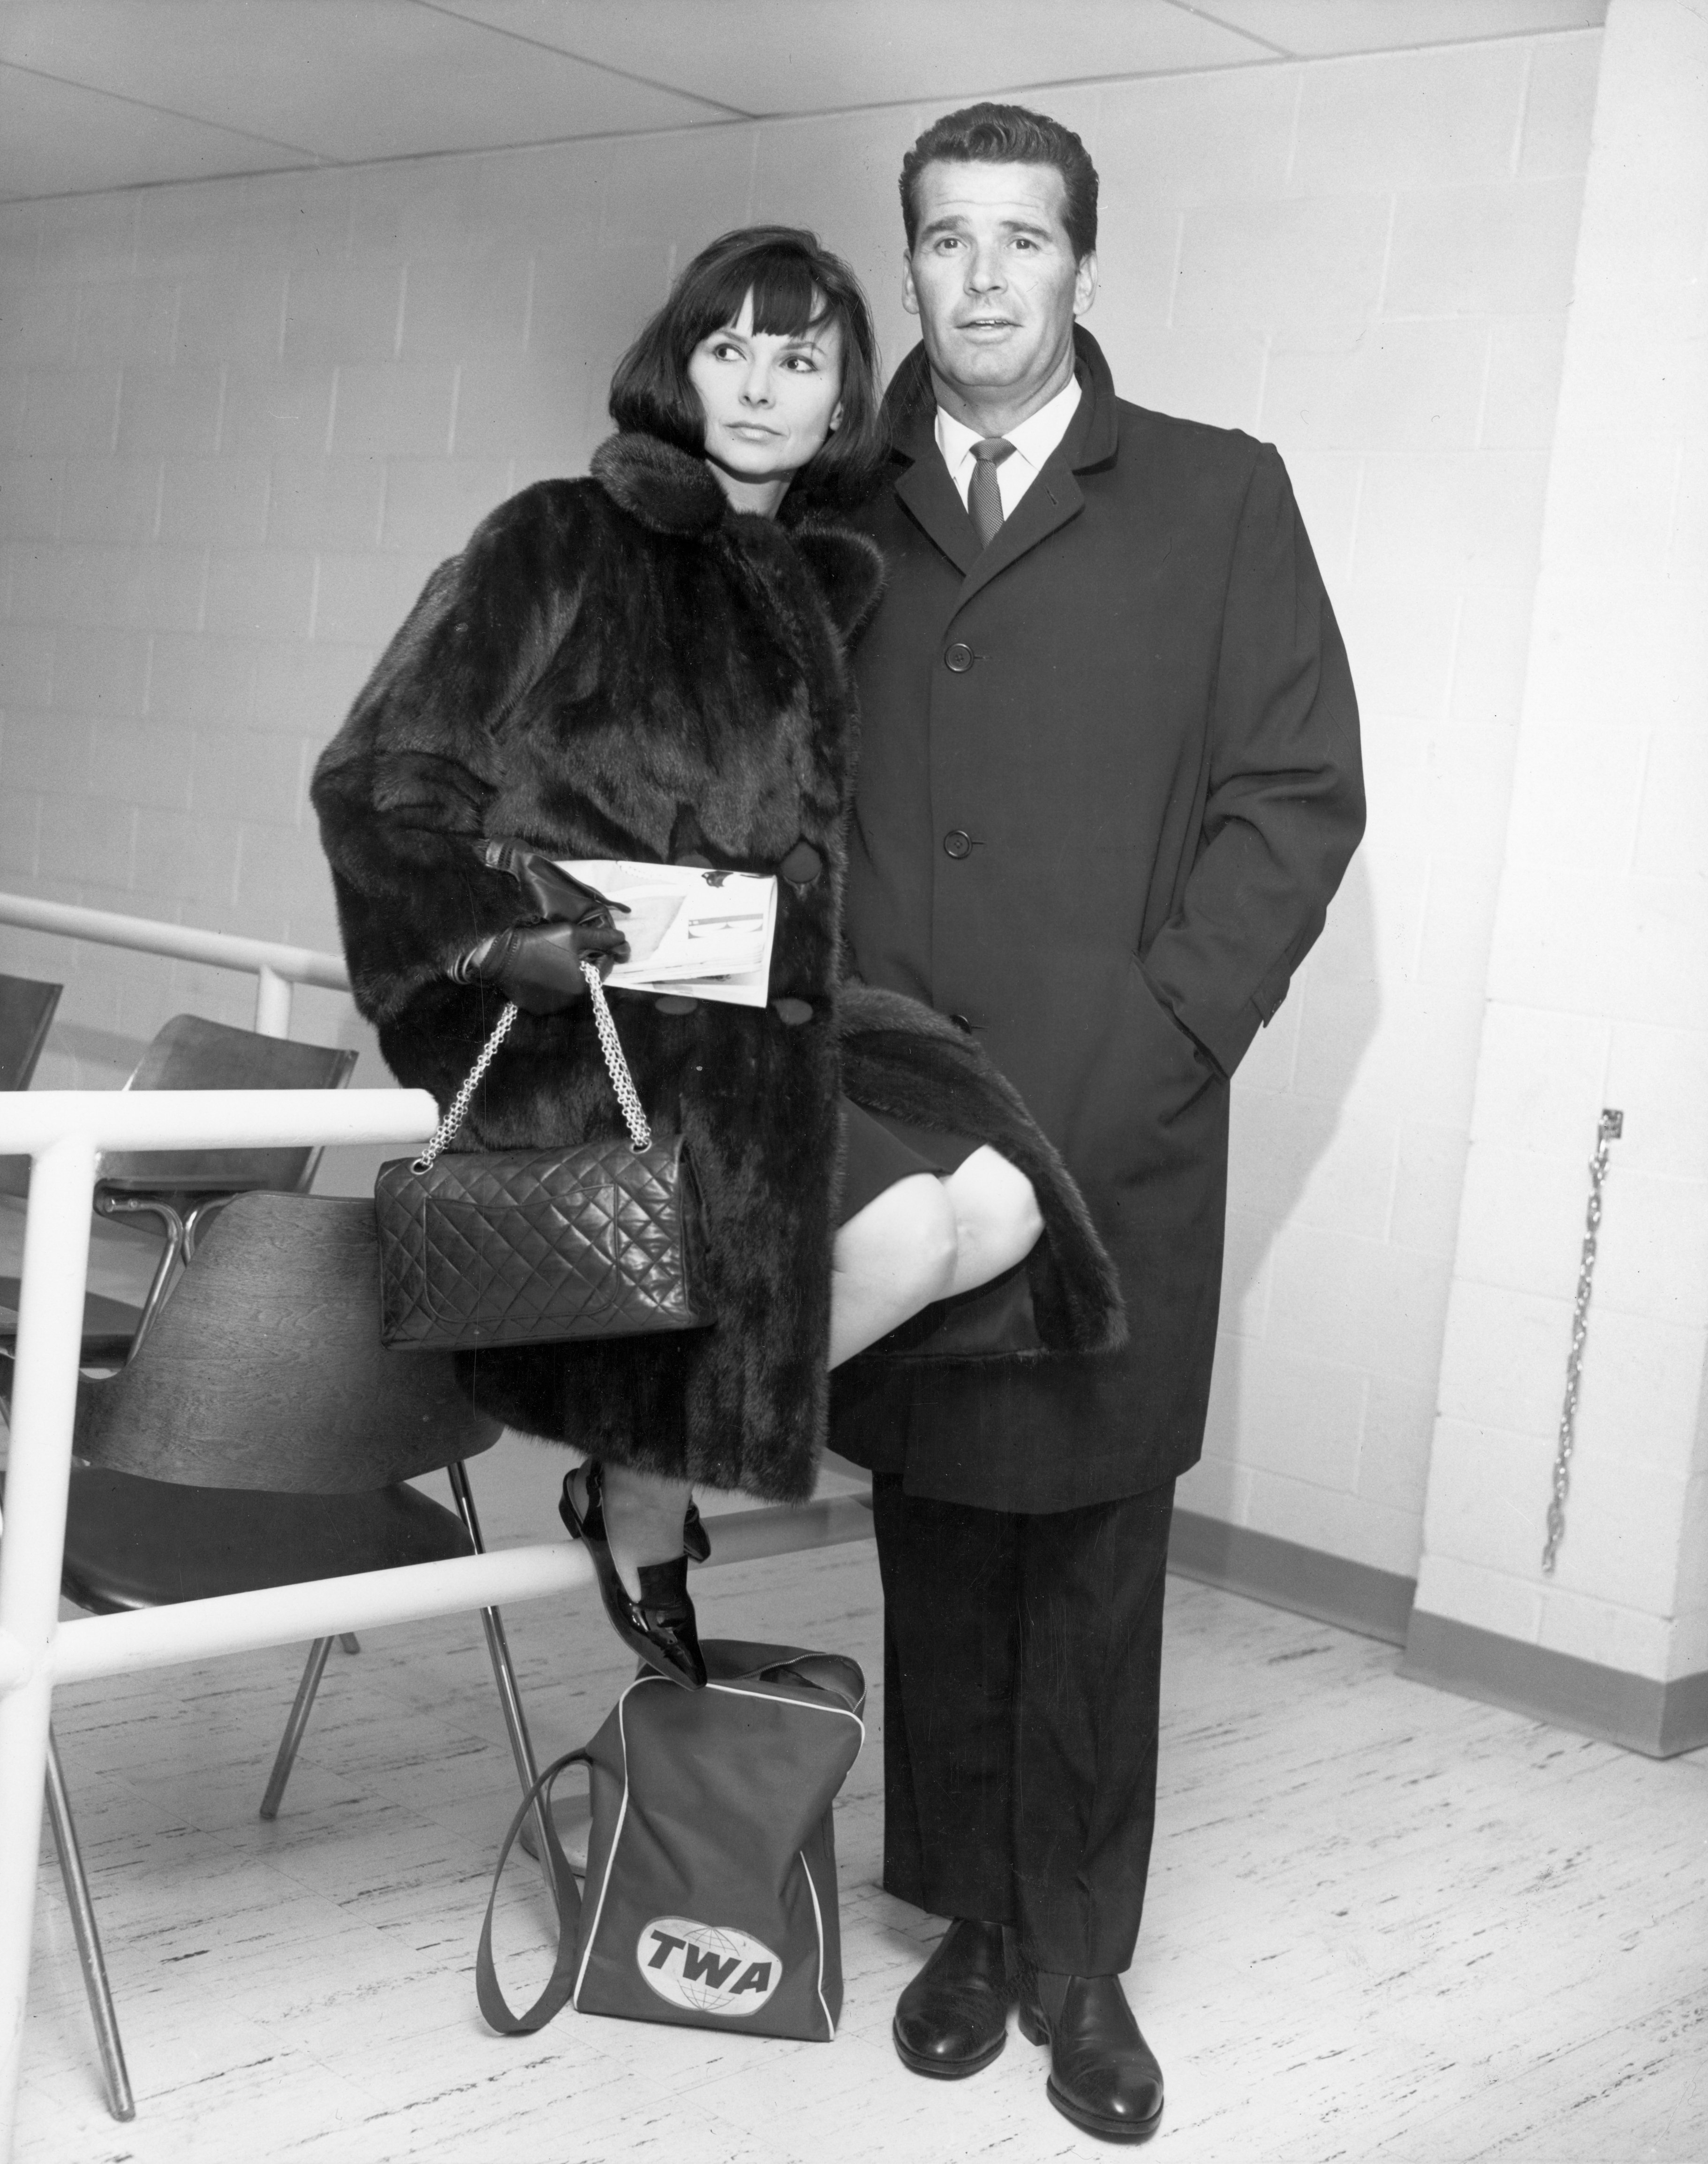 James Garner and his wife, Lois Clarke, inside John F Kennedy airport prior to boarding a flight from England to New York City. | Source: Getty Images